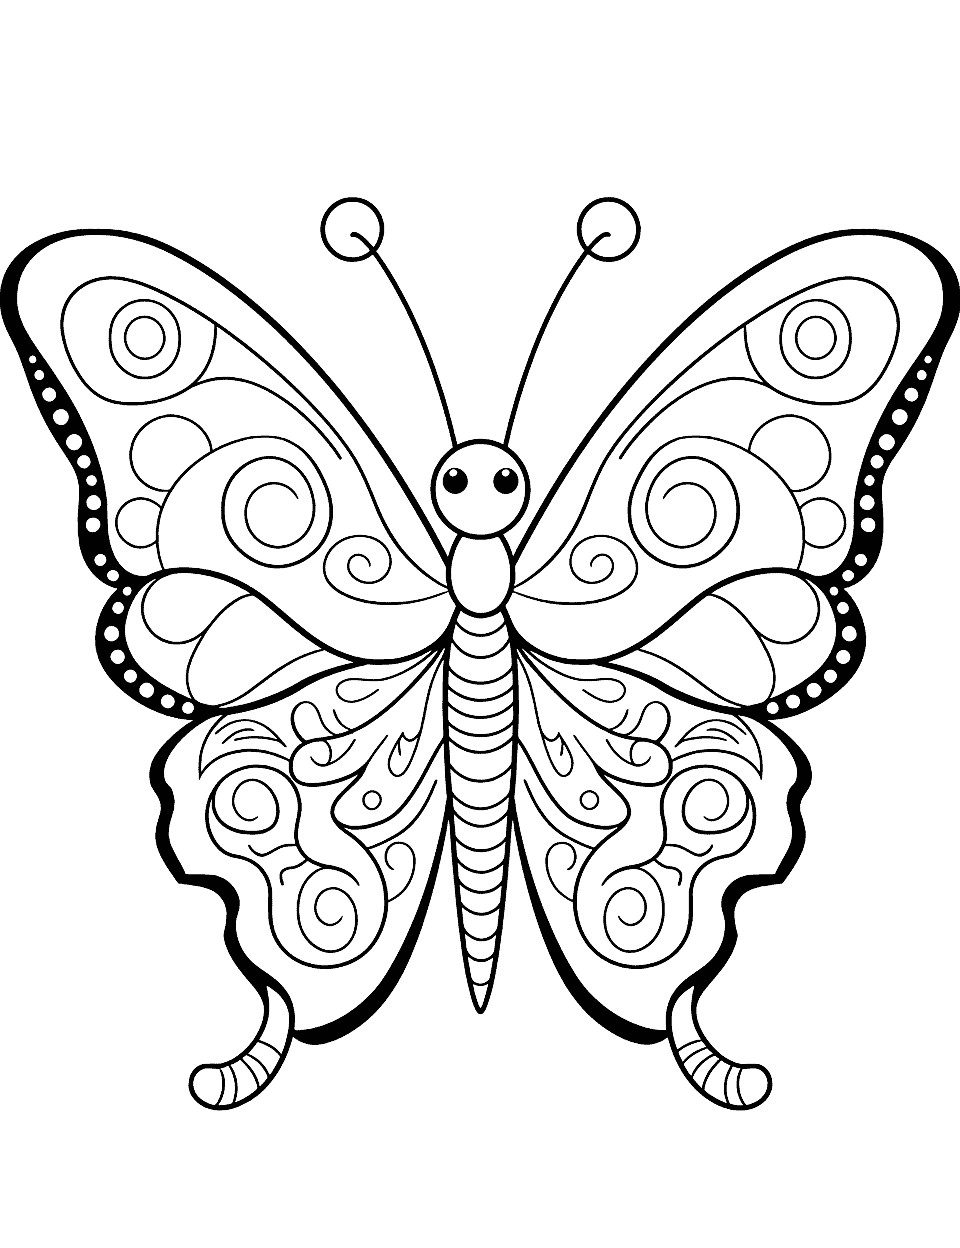 Advanced Butterfly Animal Coloring Page - A butterfly with intricate wings and delicate patterns to color.